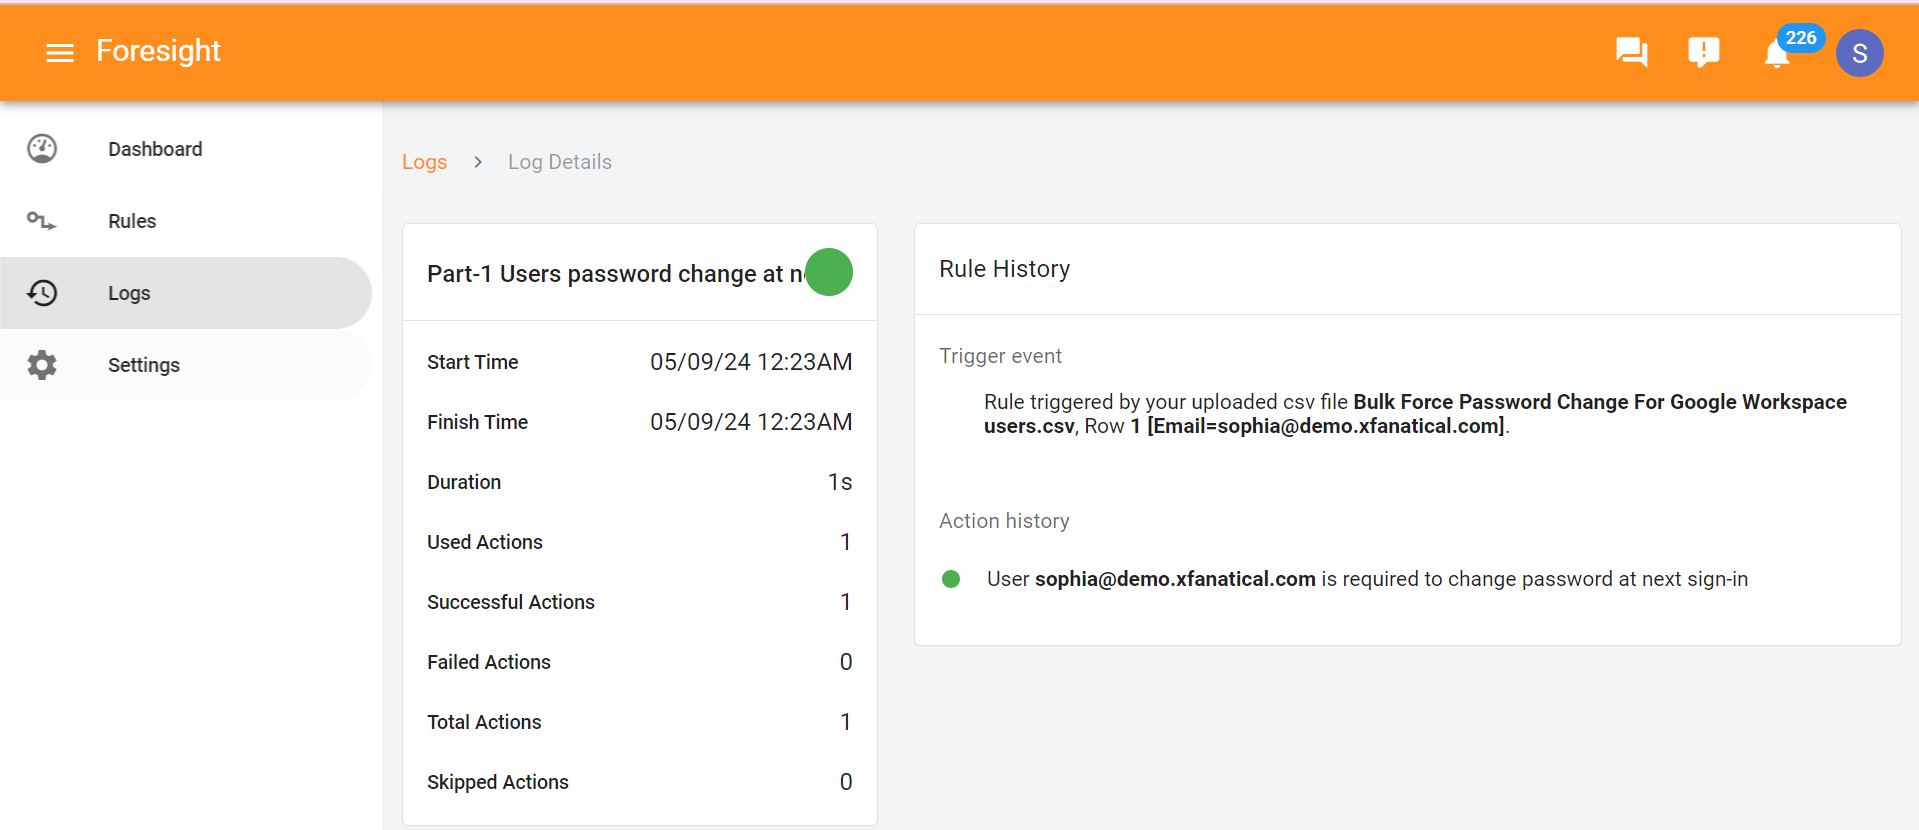 You can also access the Logs page from the left sidebar